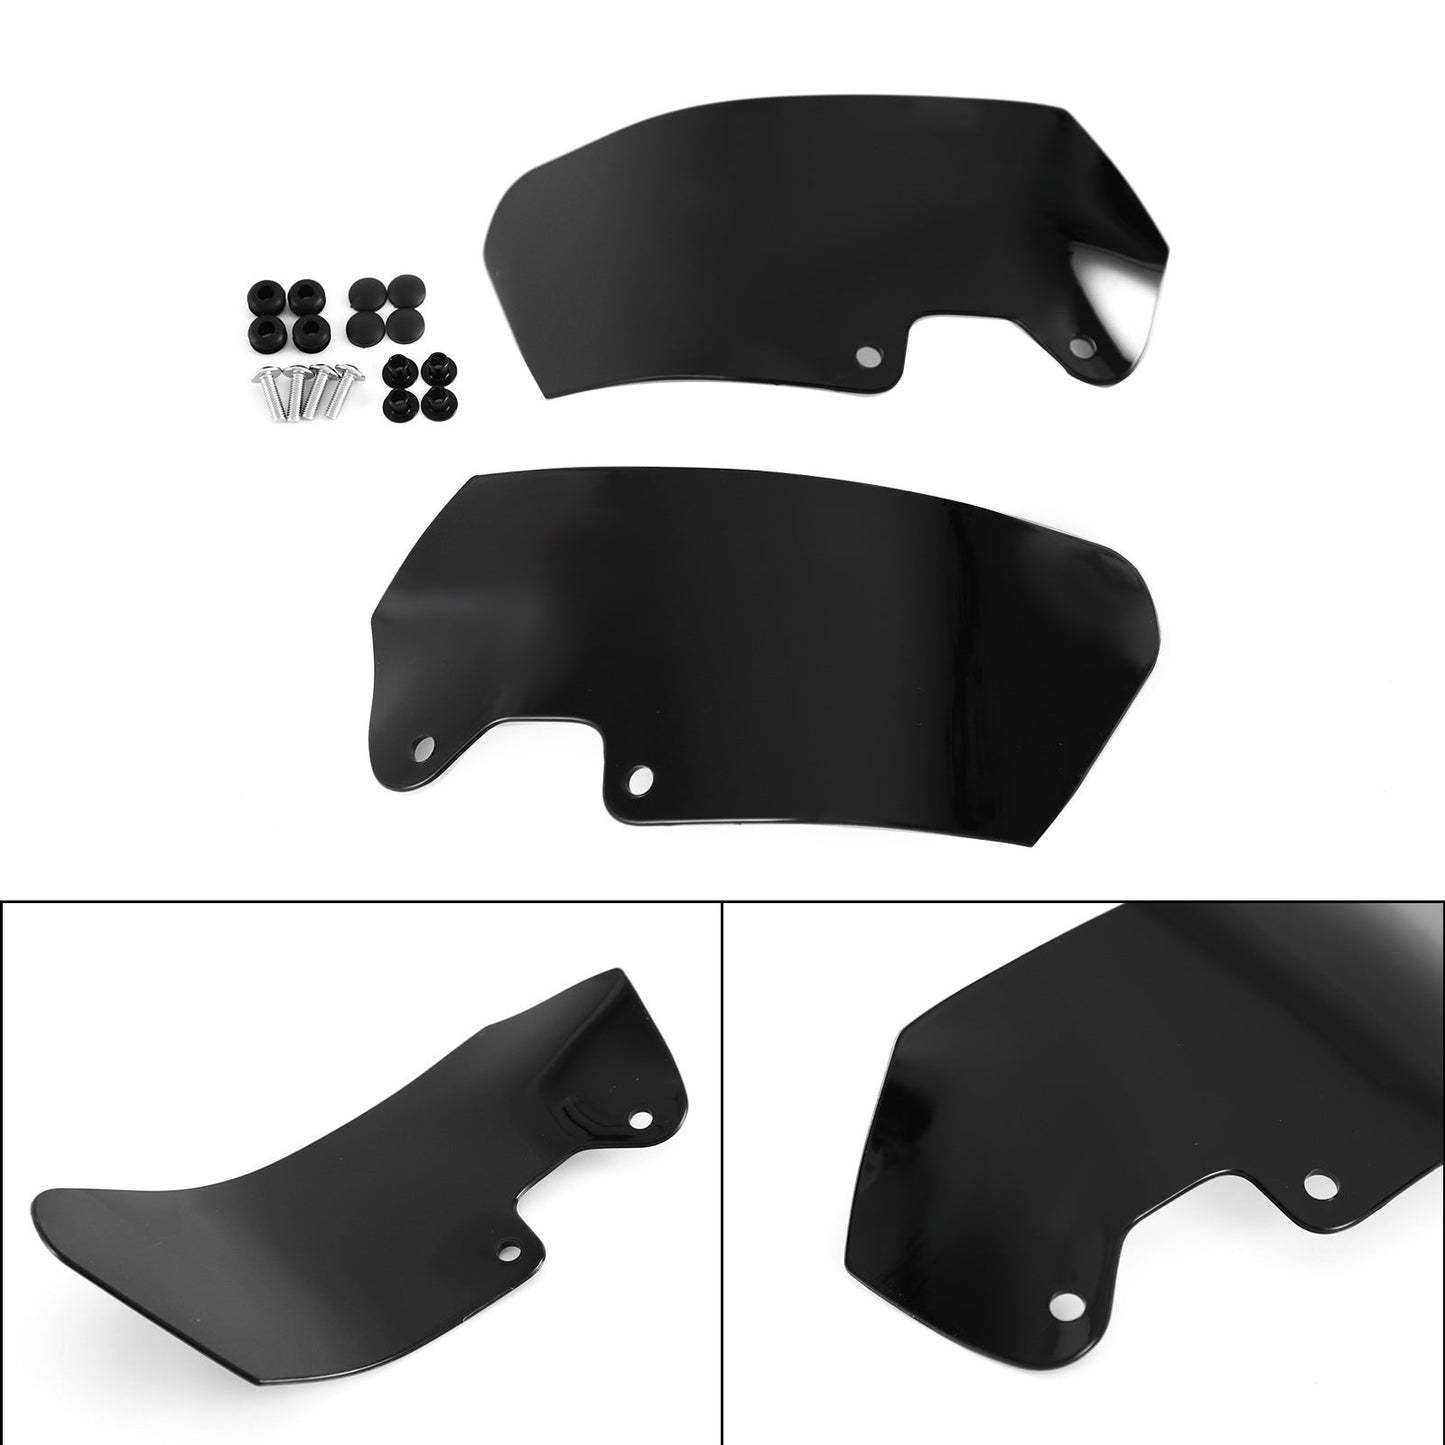 Windshield Plate Side Panels for BMW R1200GS R1200 ADV K51 Adventure 2006-2013